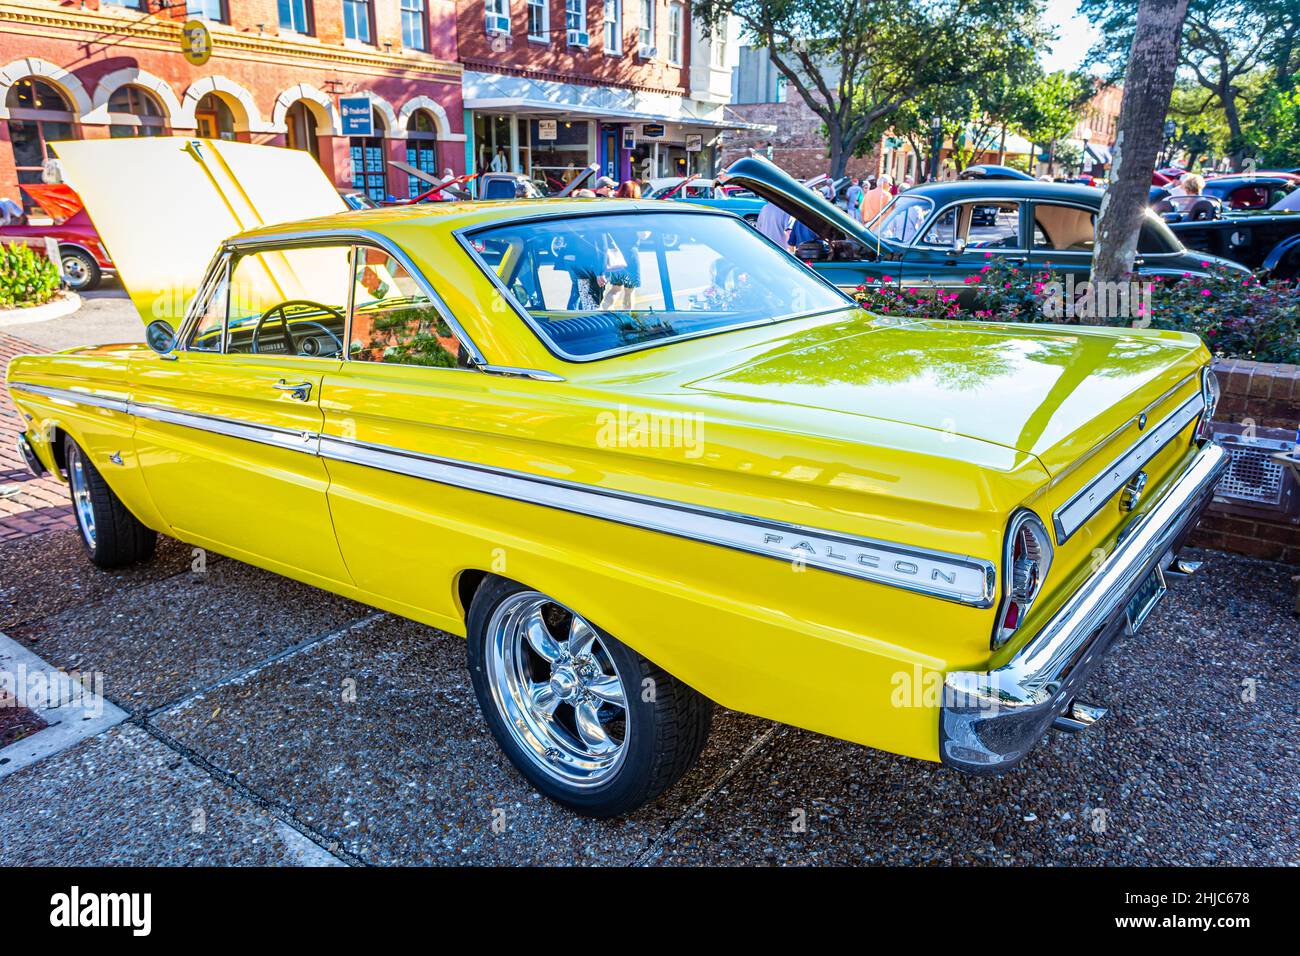 Fernandina Beach, FL - October 18, 2014: Wide angle low perspective rear corner view of a 1965 Ford Falcon Futura Coupe at a classic car show in Ferna Stock Photo